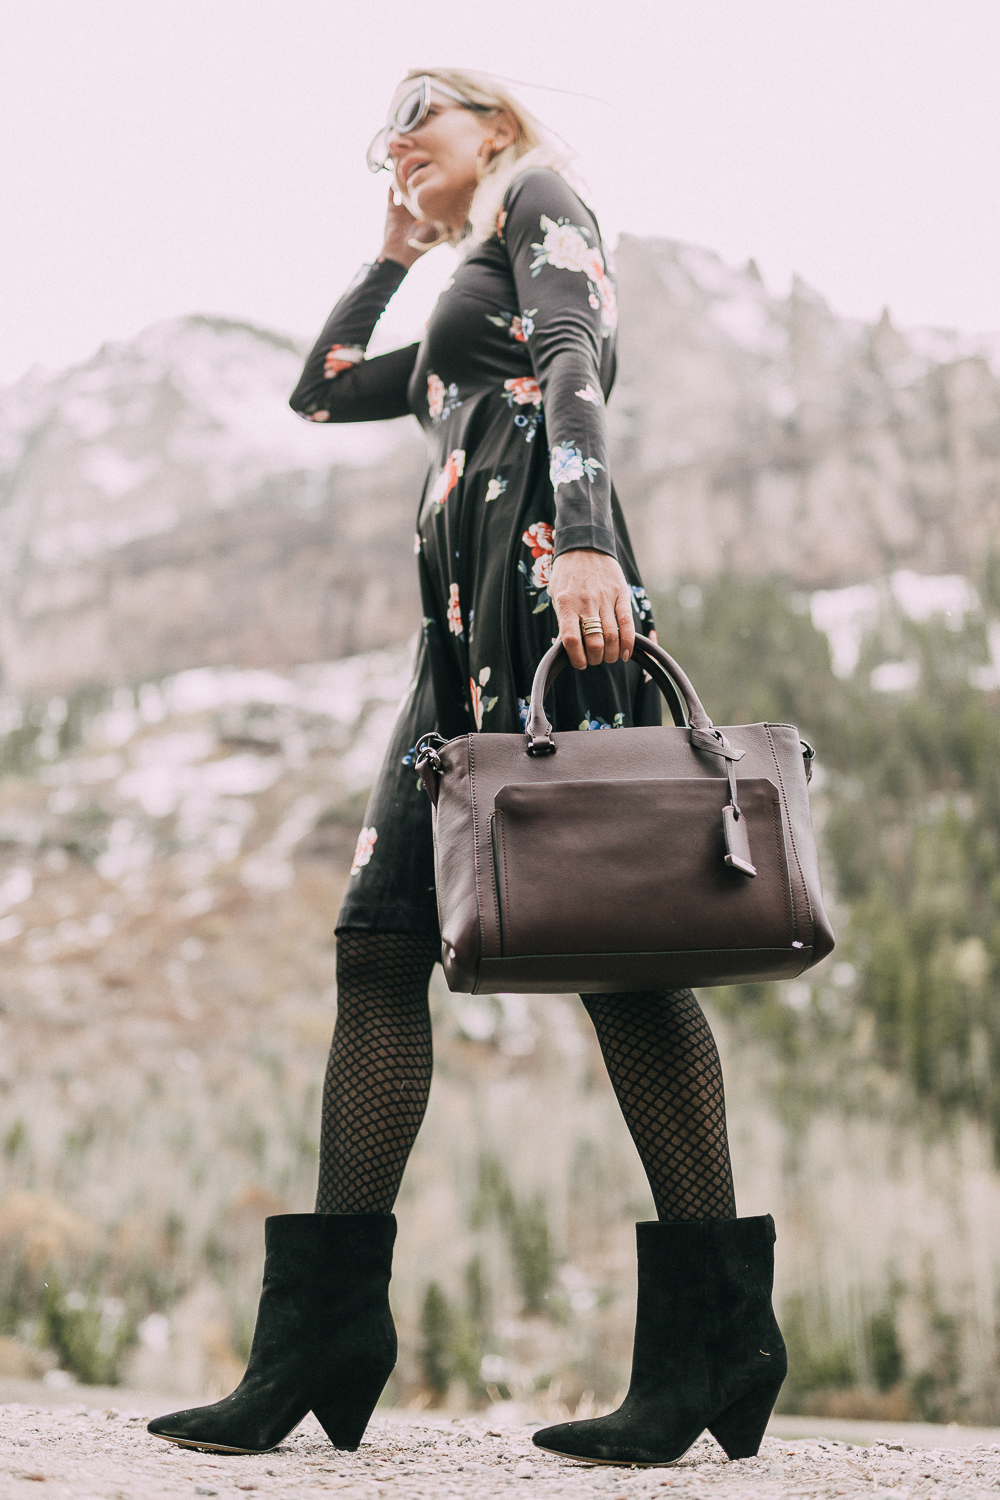 black regina suede ankle booties by Vince Camuto worn with black floral print dress and burgundy tote bag on blonde woman in rocky mountains